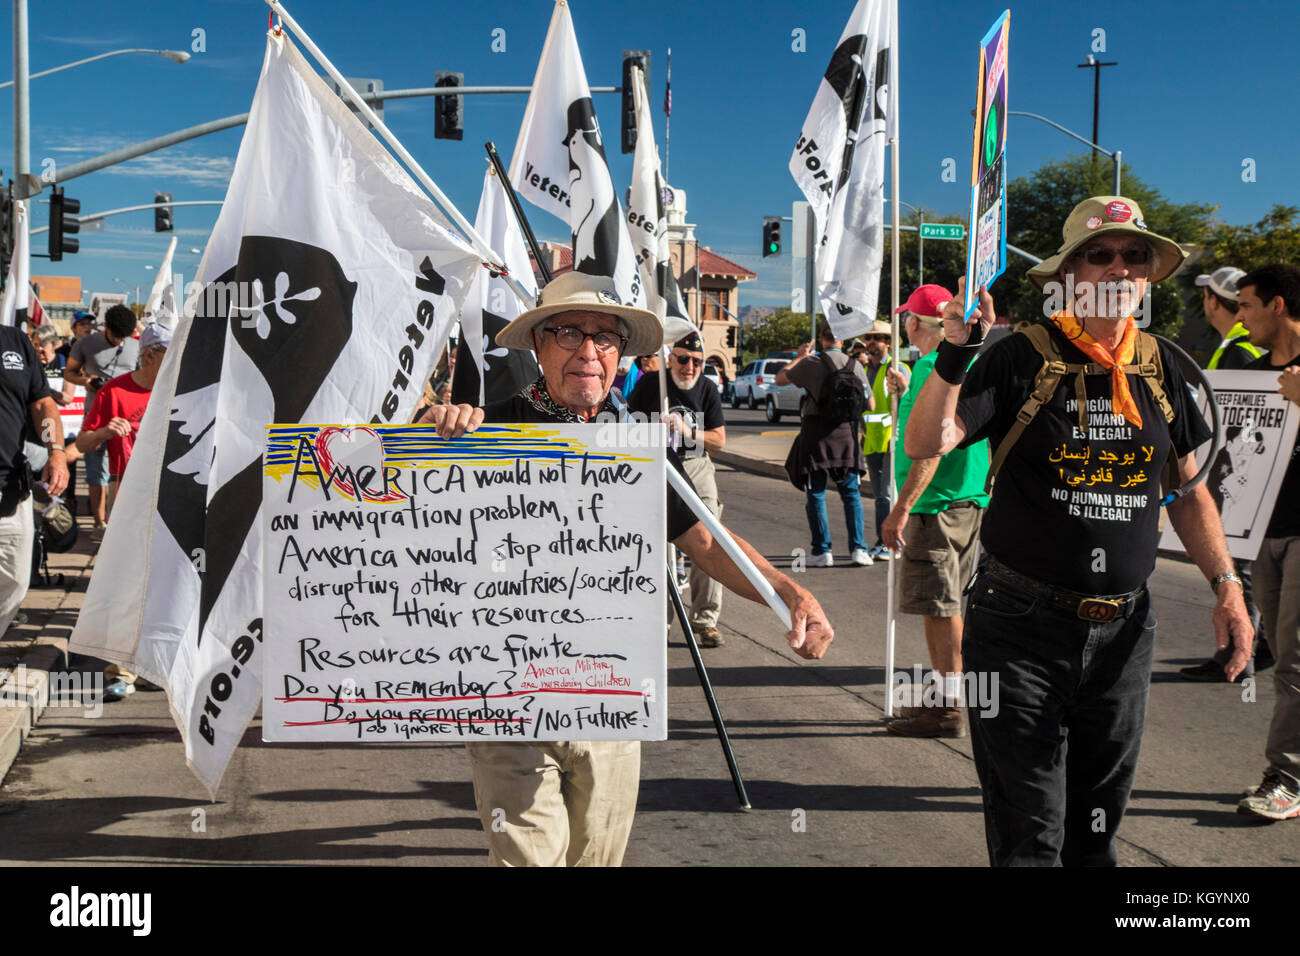 Nogales, Arizona USA and Nogales, Sonora Mexico - 11 November 2017 - On Veterans Day, members of Veterans for Peace led a march and rally on both sides of the U.S.-Mexico border fence to protest the separation of immigrant families, U.S. policies that make it hard for refugees fleeing repression to enter the United States, and the deportation of veterans who have served in the U.S. military. The events were organized by the School of the Americas Watch, a group of religious and community activists. Stock Photo